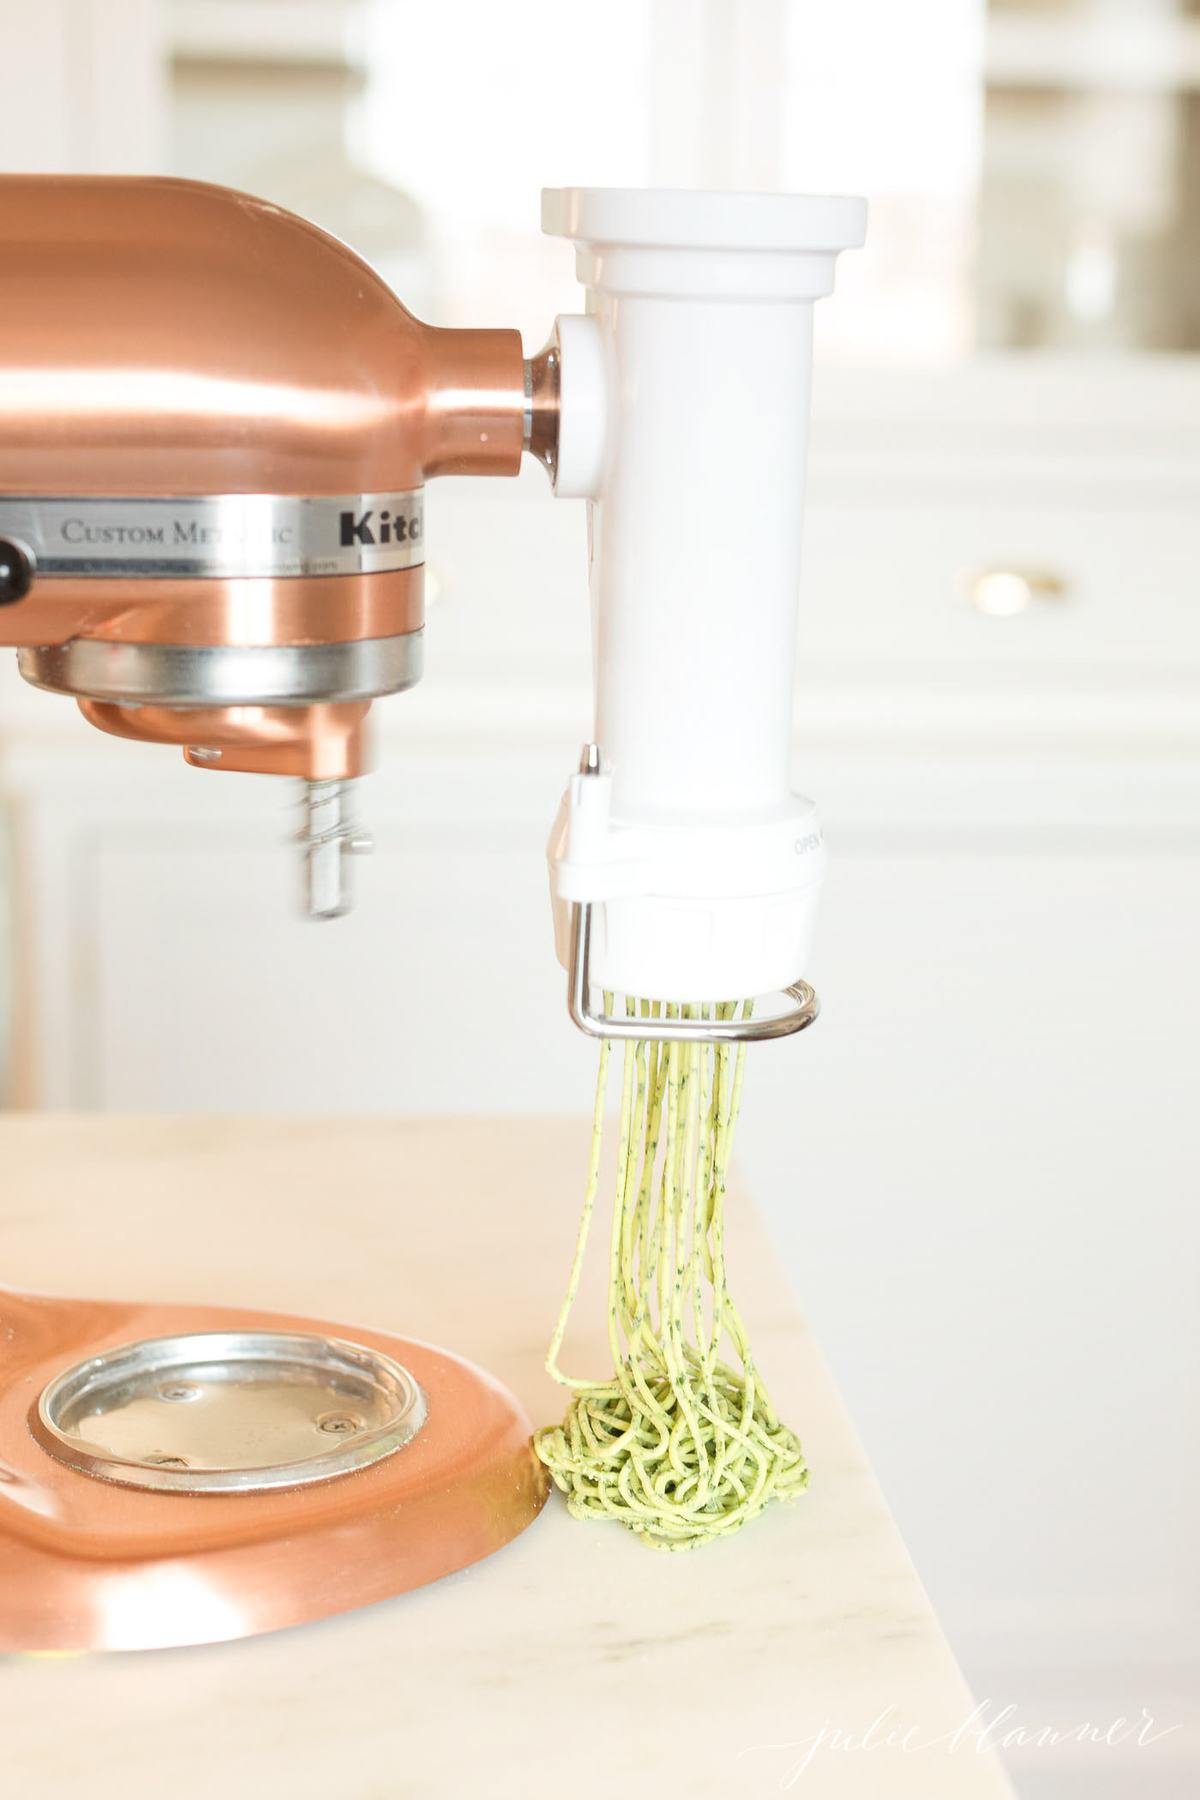 Making the recipe with a Kitchen Aid attachment